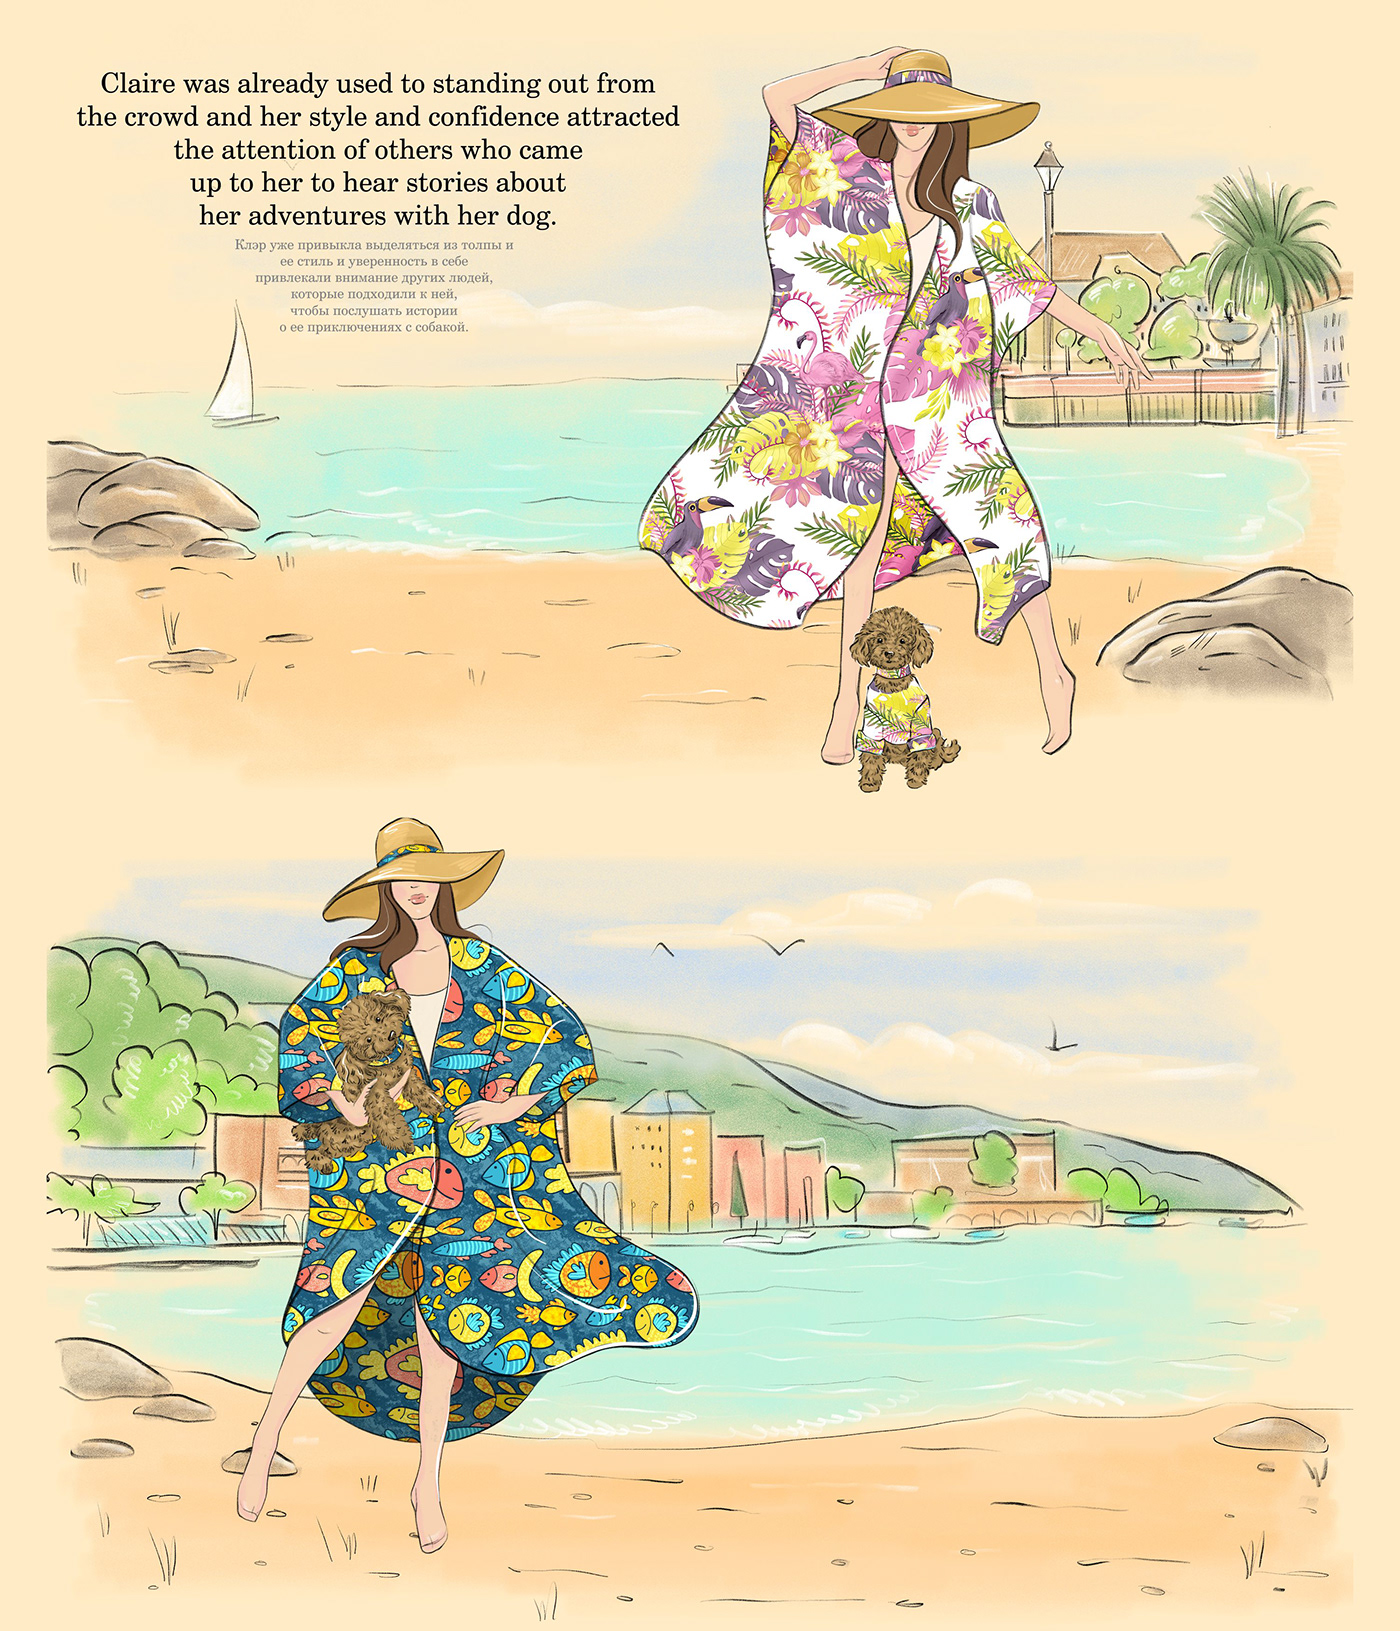 Illustration. A girl in a kimono with a dog on the beach. France. Textile design.
